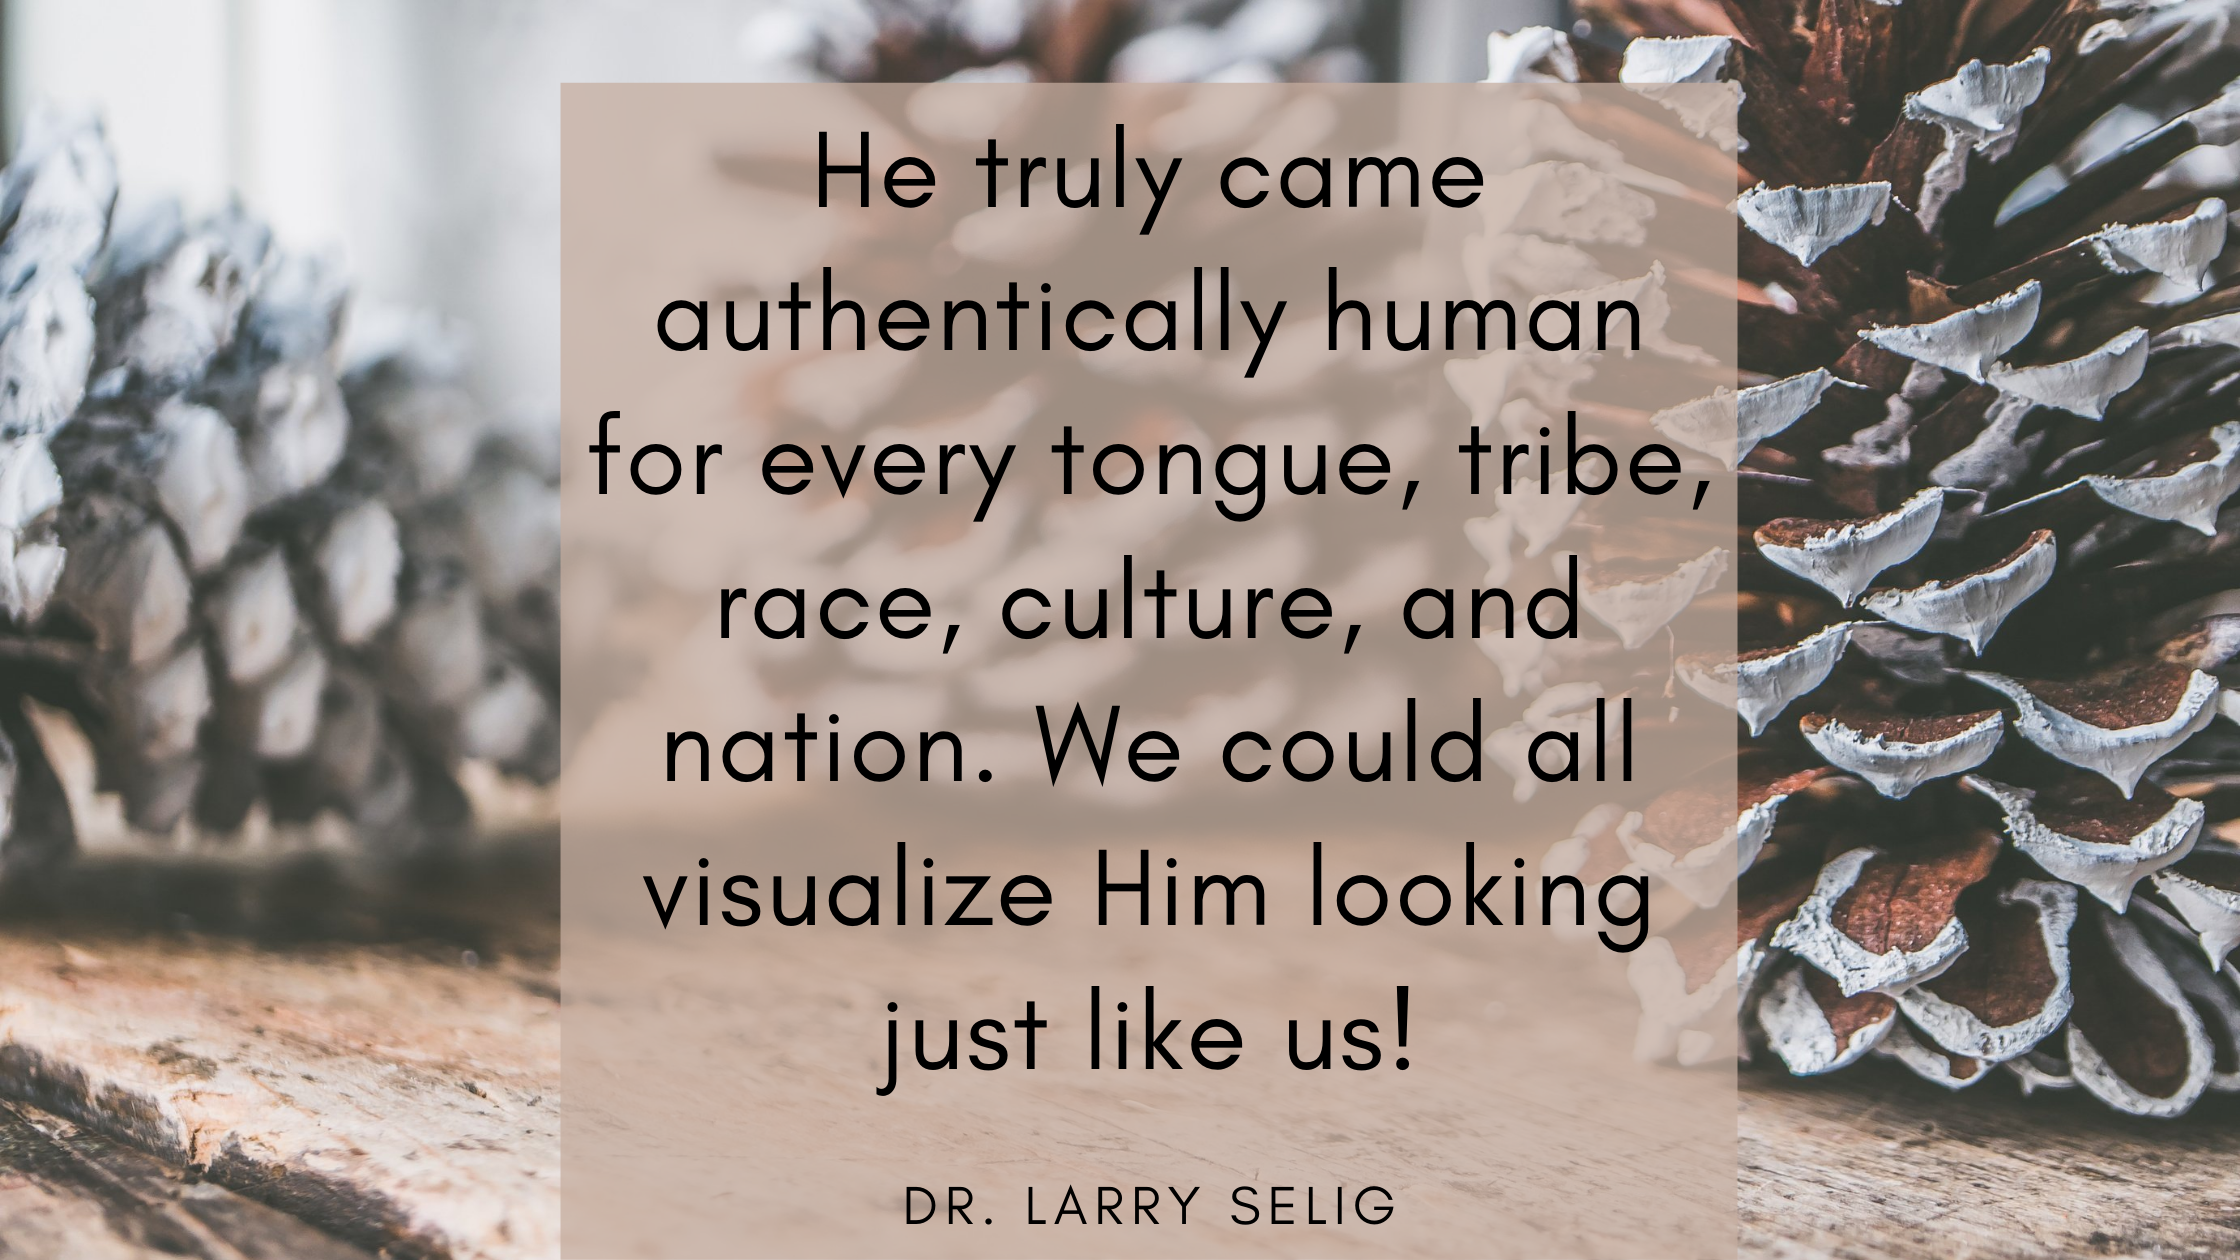 He truly came authentically human for every tongue, tribe, race, culture, and nation. We could all visualize Him looking just like us!